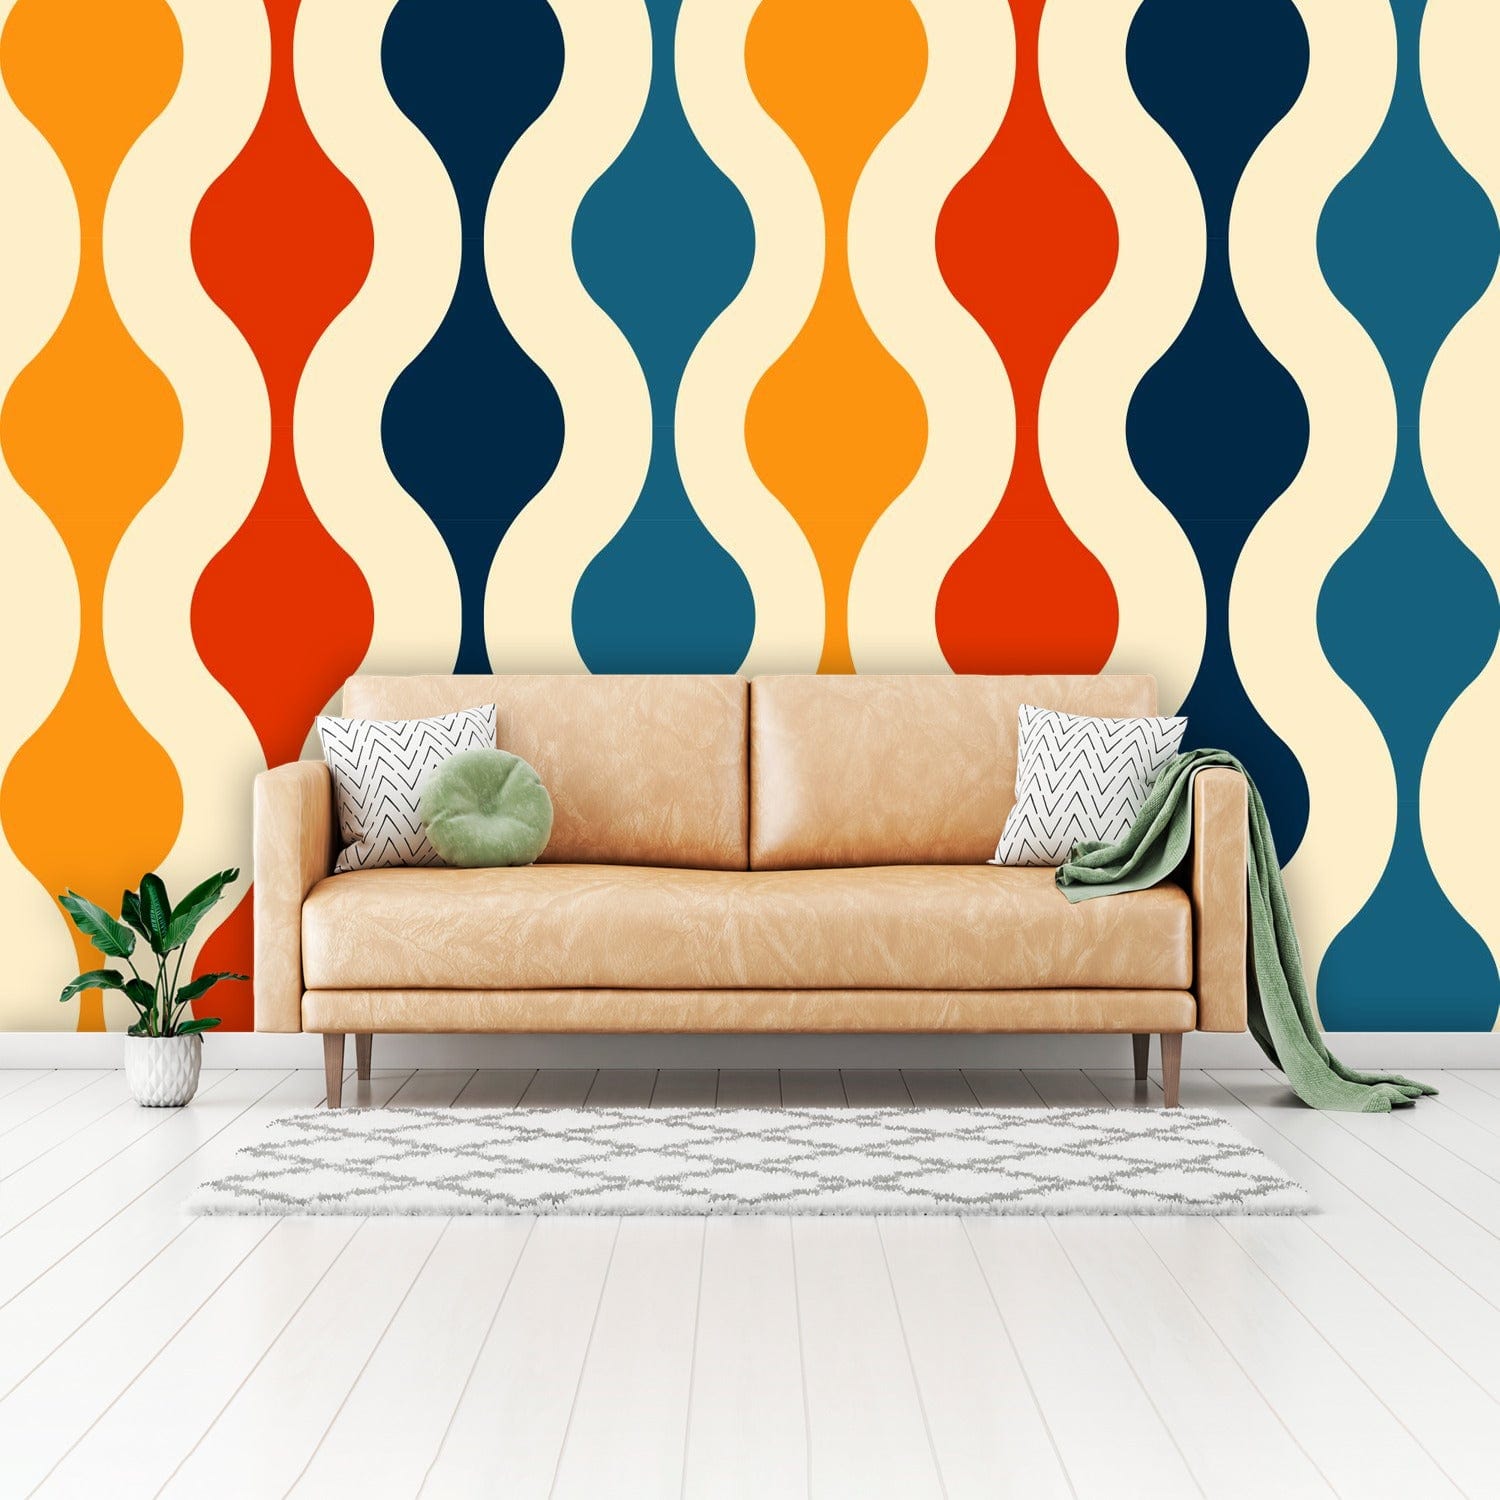 Retro Abstracts, Mid Century Modern Peel And Stick, Mustard Yellow, Red, Blue, Groovy Wall Murals Wallpaper H110 x W160